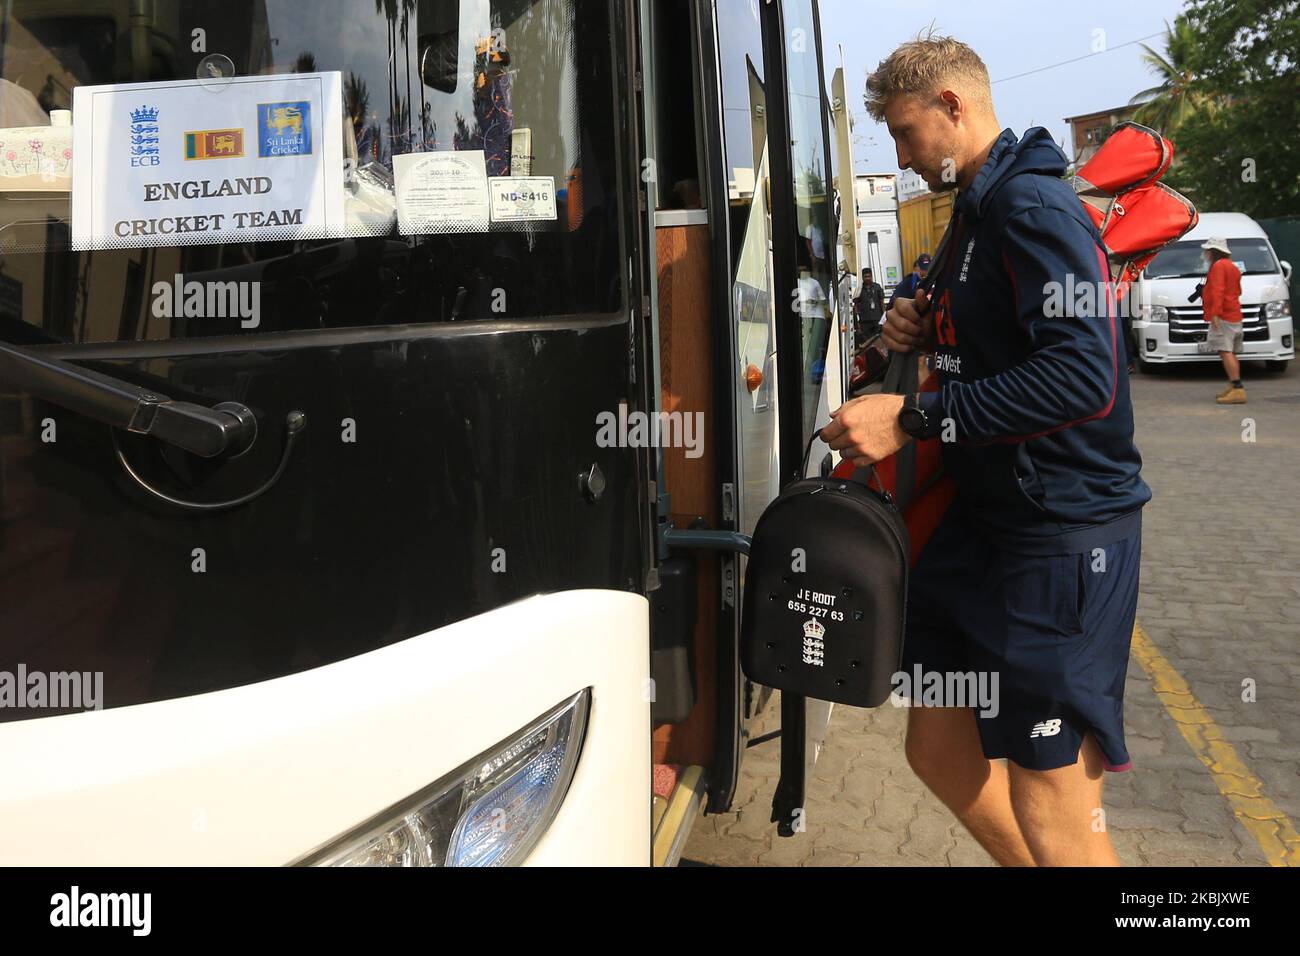 England cricket captain Joe Root gets in to the bus after the second practice match was called off at P Sara Oval on March 13, 2020 in Colombo, Sri Lanka England's Test series against Sri Lanka has been postponed because of the coronavirus pandemic. All players and staff will return to the UK as soon as possible following the the decision which has been taken in 'unprecedented times'. 'The physical and mental wellbeing of our players and support teams is paramount,' said the England and Wales Cricket Board (ECB) in a statement. The two-Test series was due to begin in Galle on Thursday, 19 Marc Stock Photo